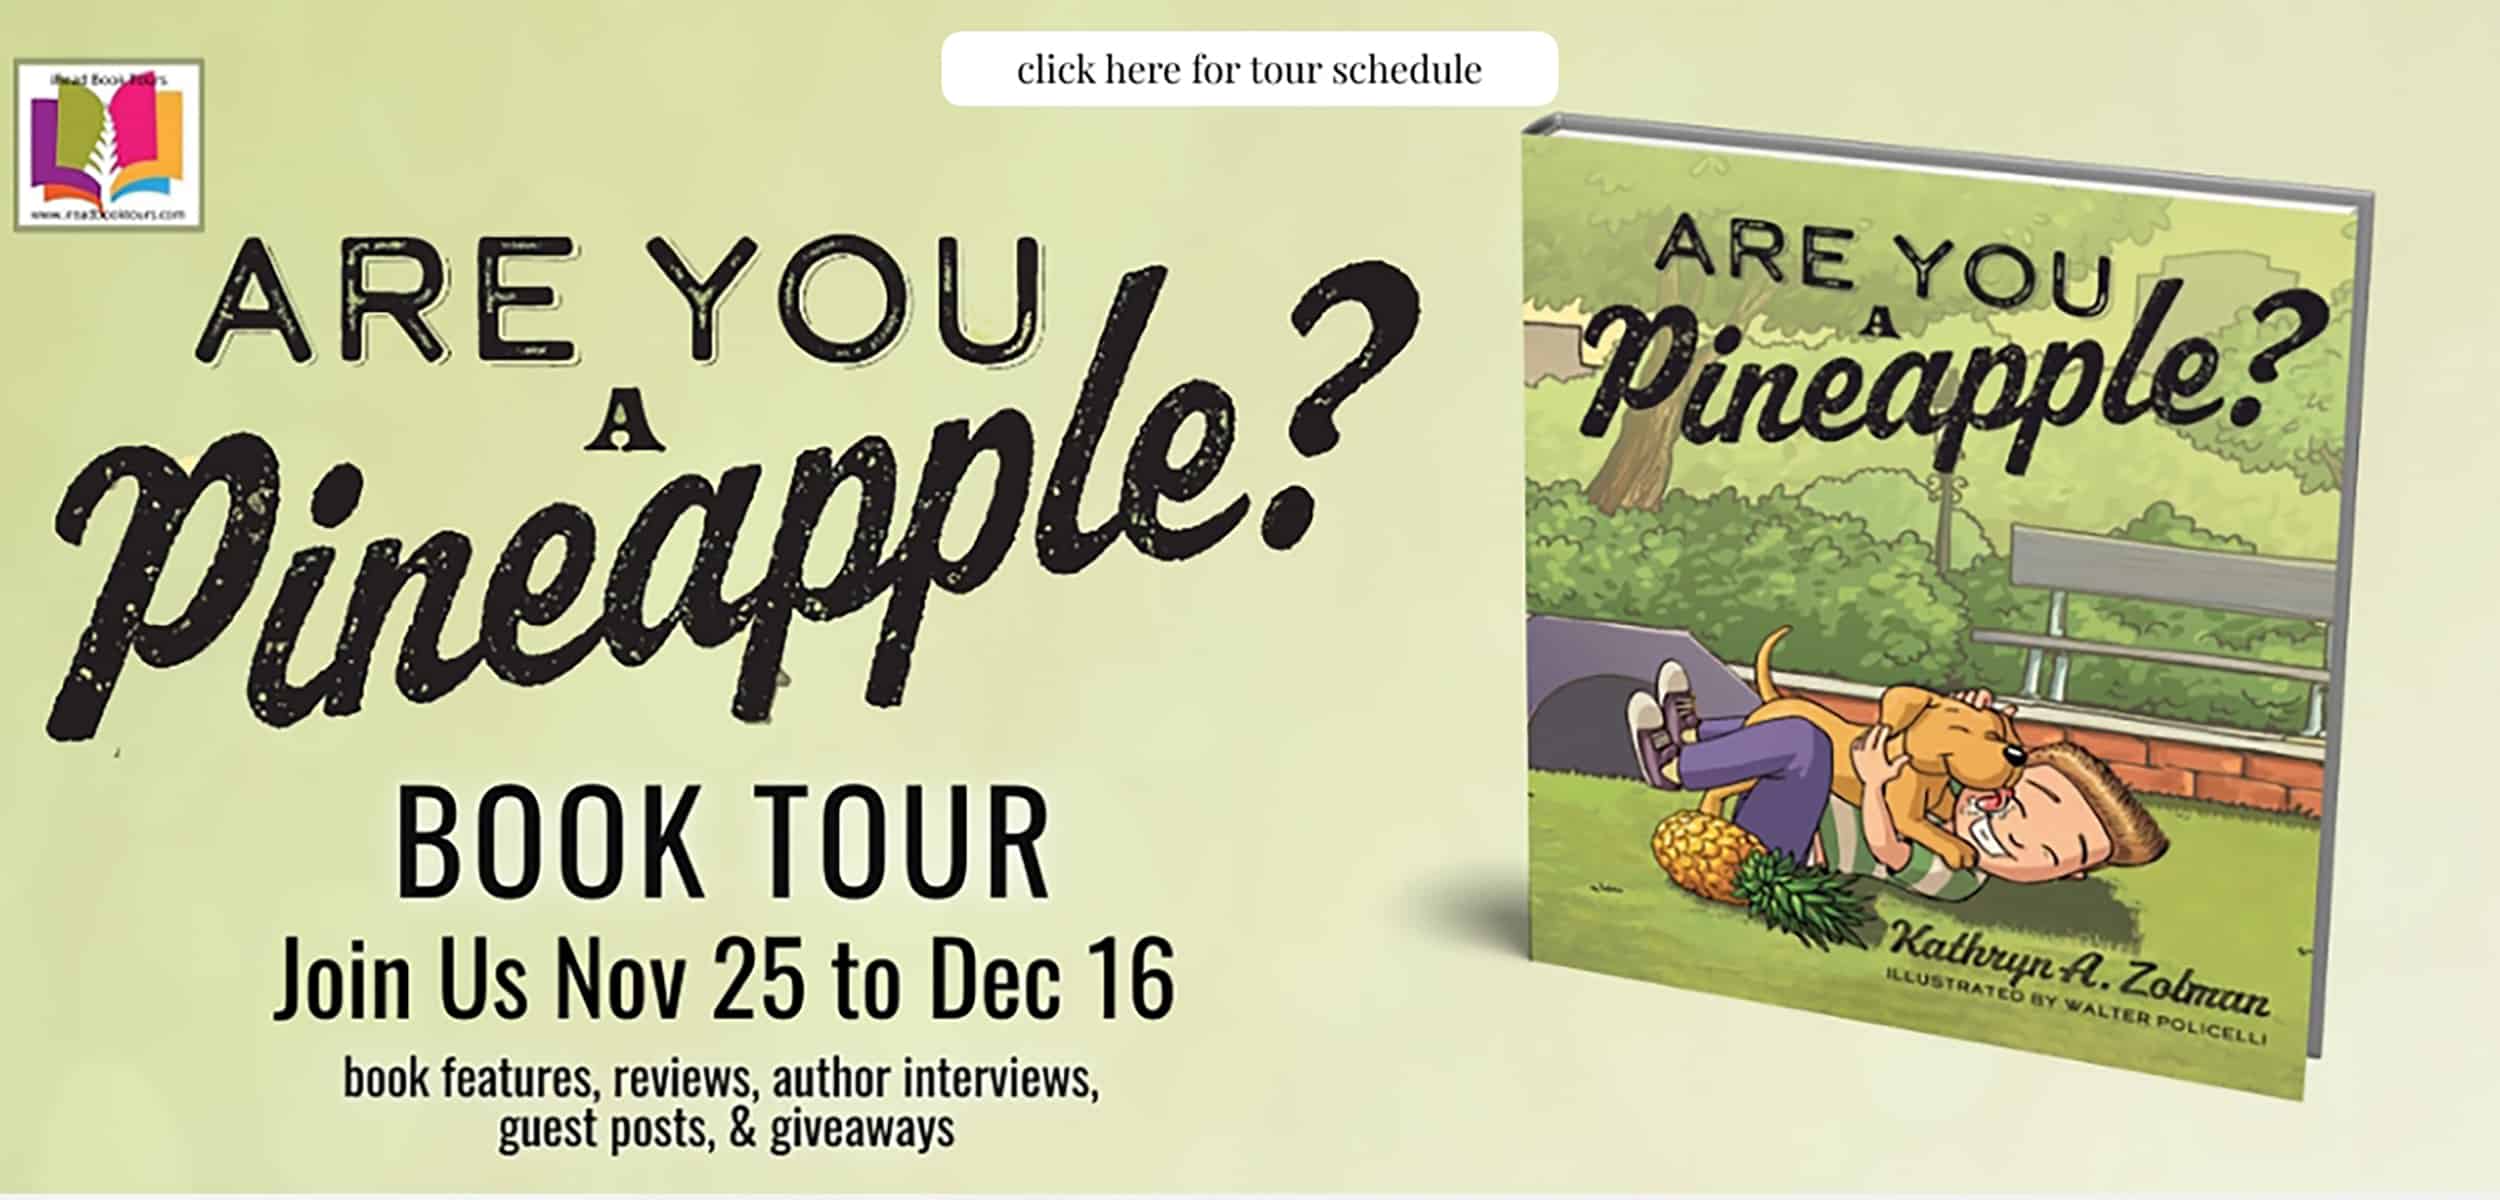 Are You a Pineapple? by Kathryn A Zolman | Children's Book Review ~ Guest Post ~ Giveaway (ends Dec 17, 2022)